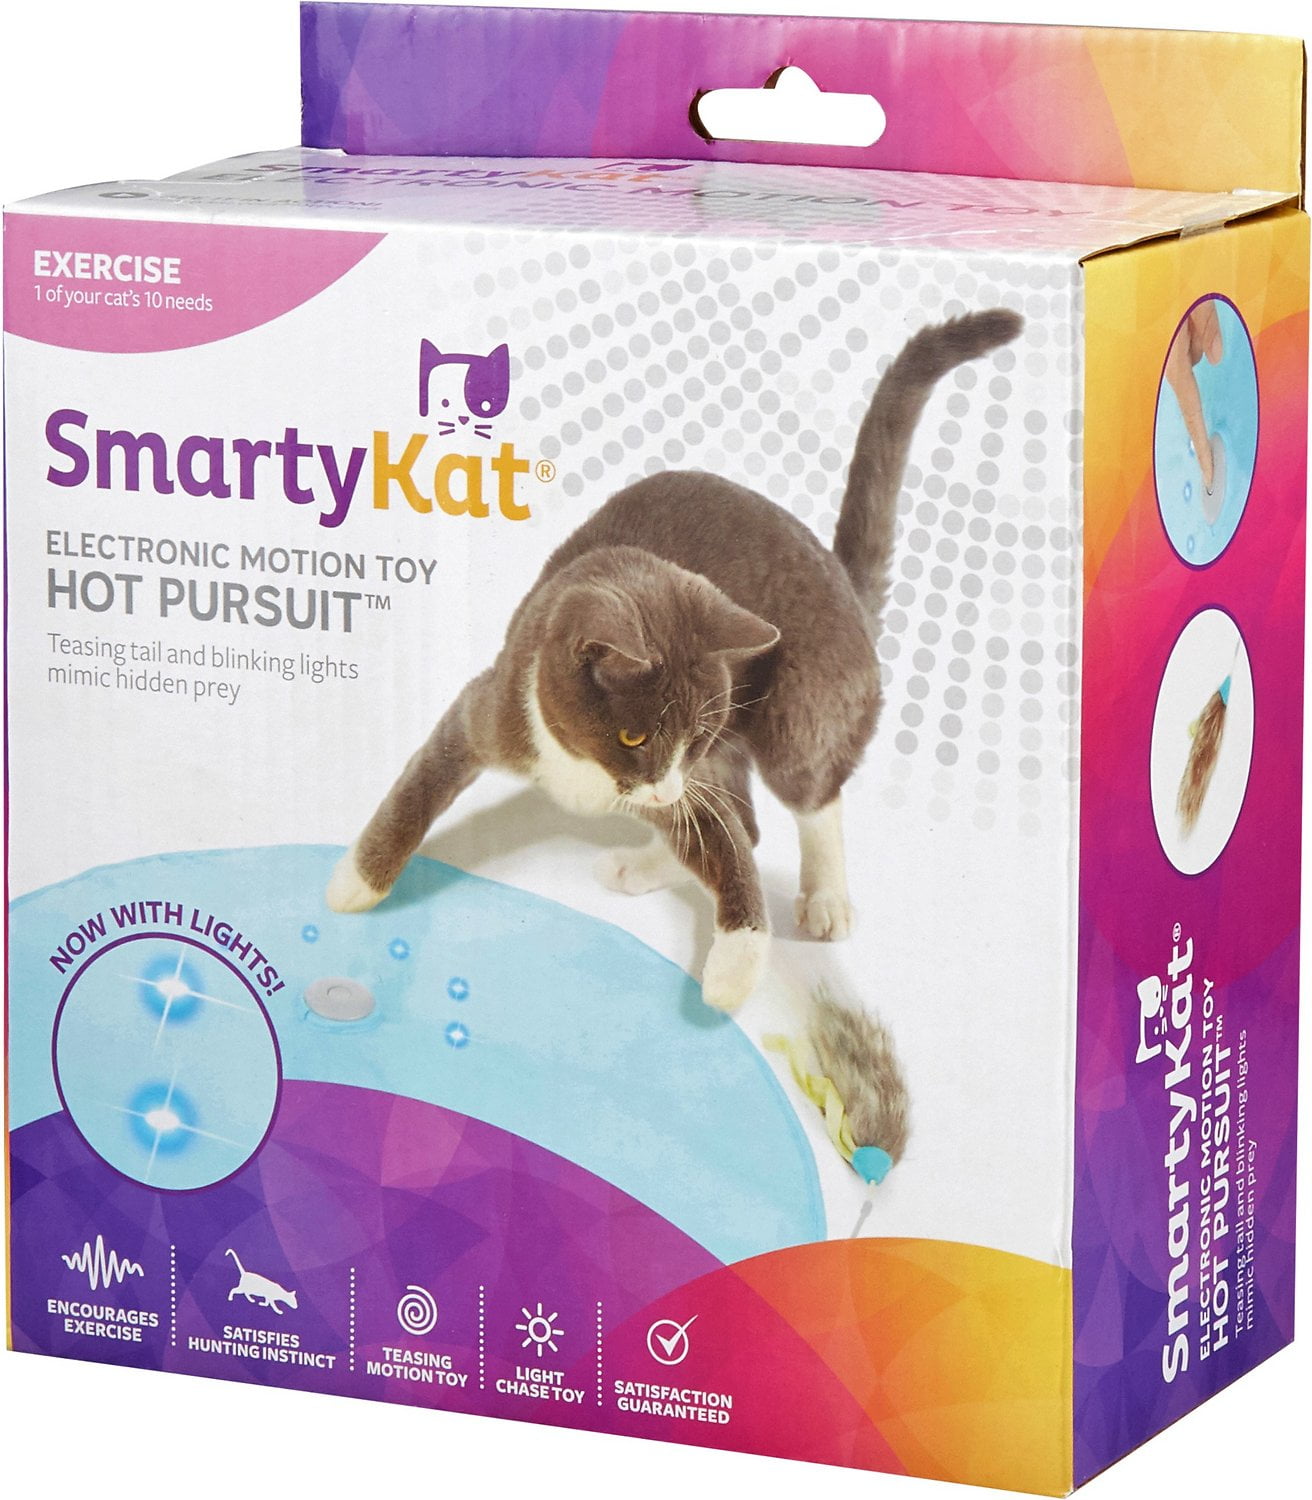 smartykat hot pursuit cat toy concealed motion toy